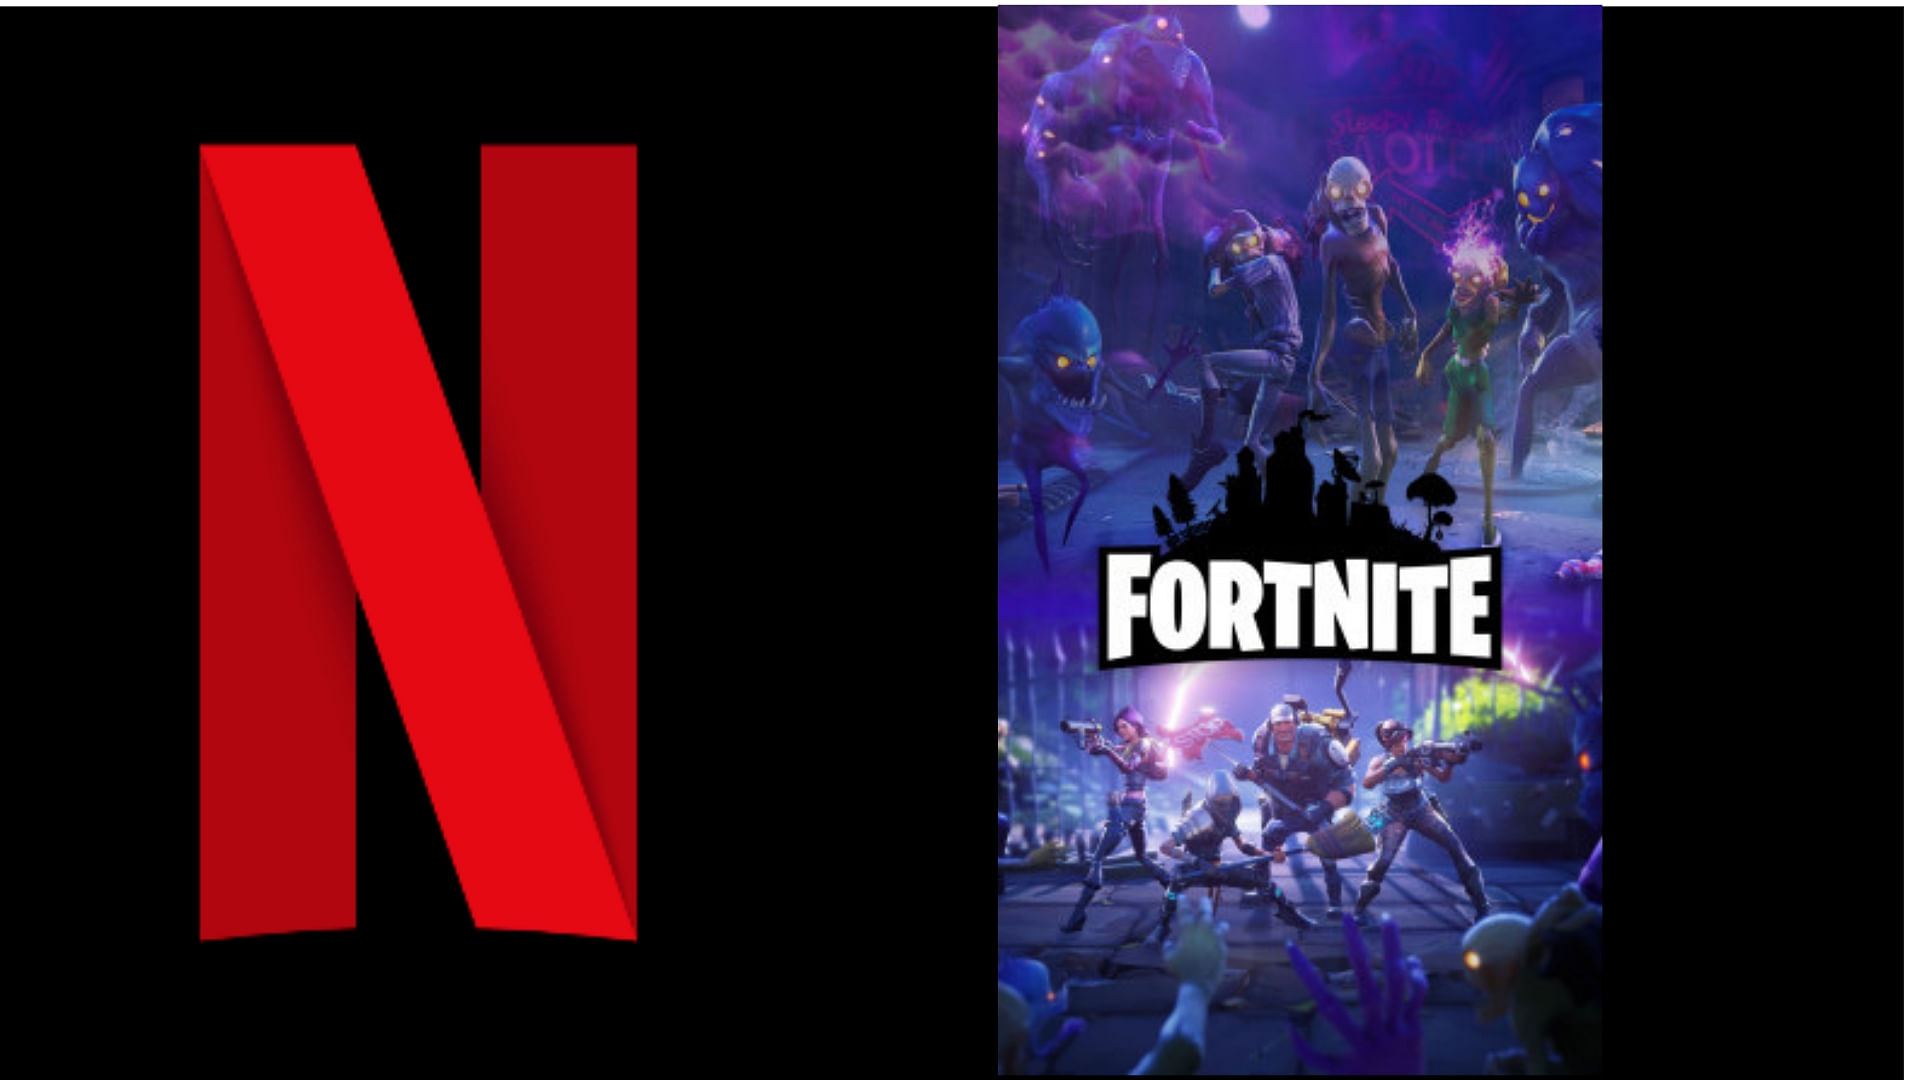 Netflix told its investors that it competes with Fortnite more than HBO.